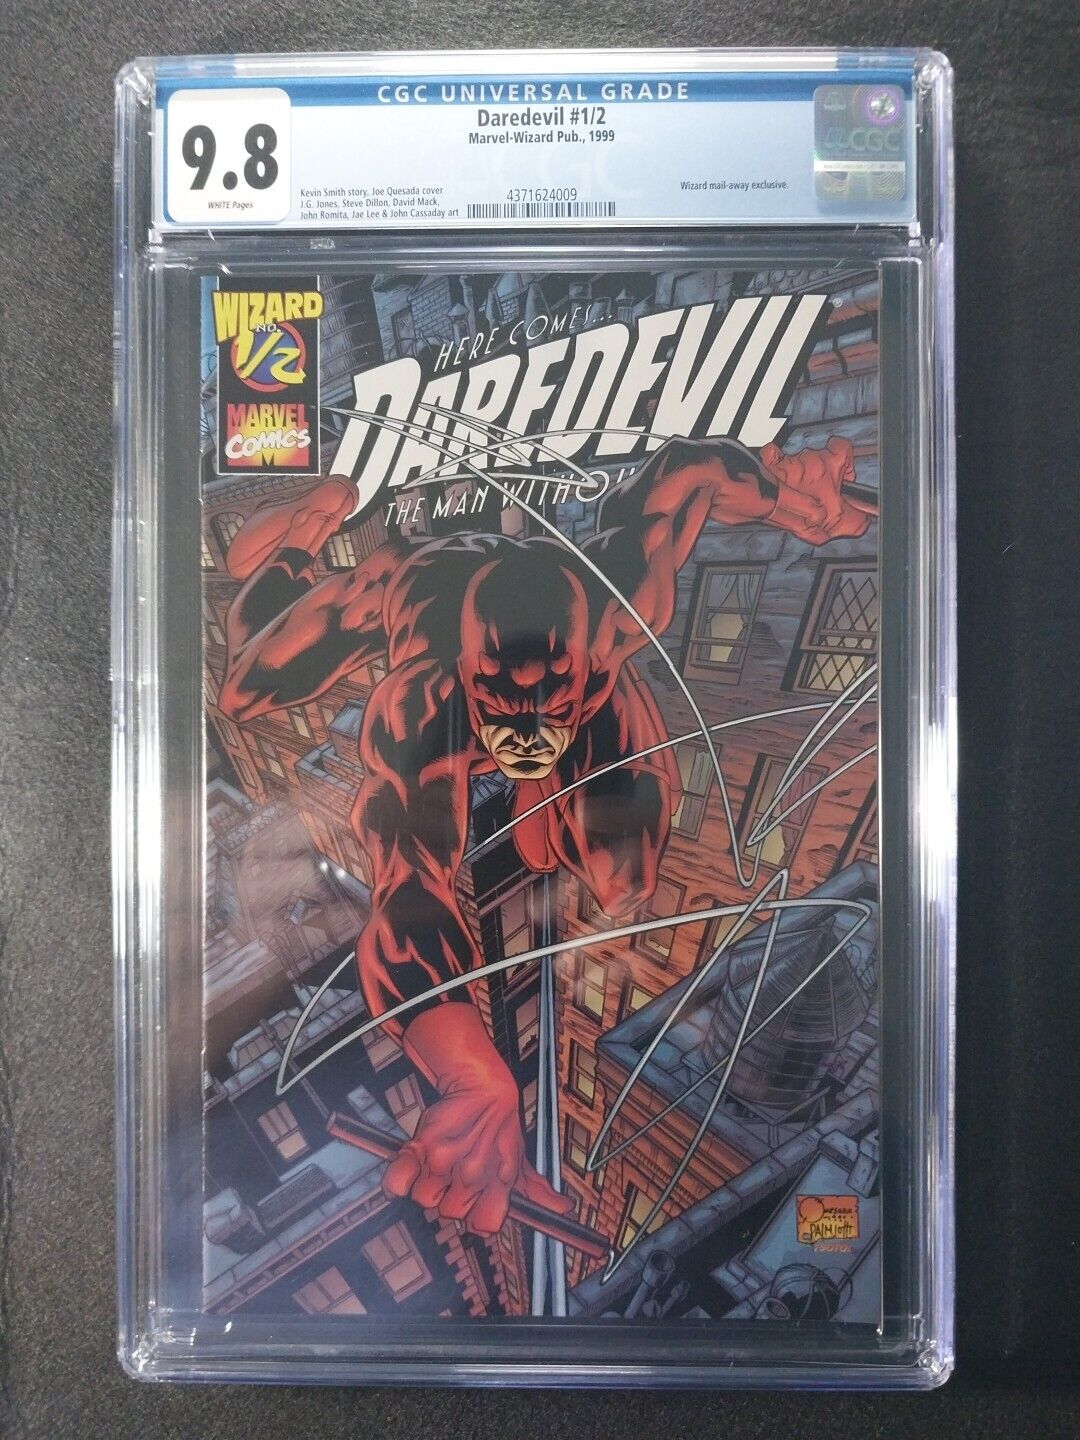 Daredevil #1/2 CGC 9.8 NM/M Wizard Mail-Away Exclusive Scarce in 9.8 WP 1999